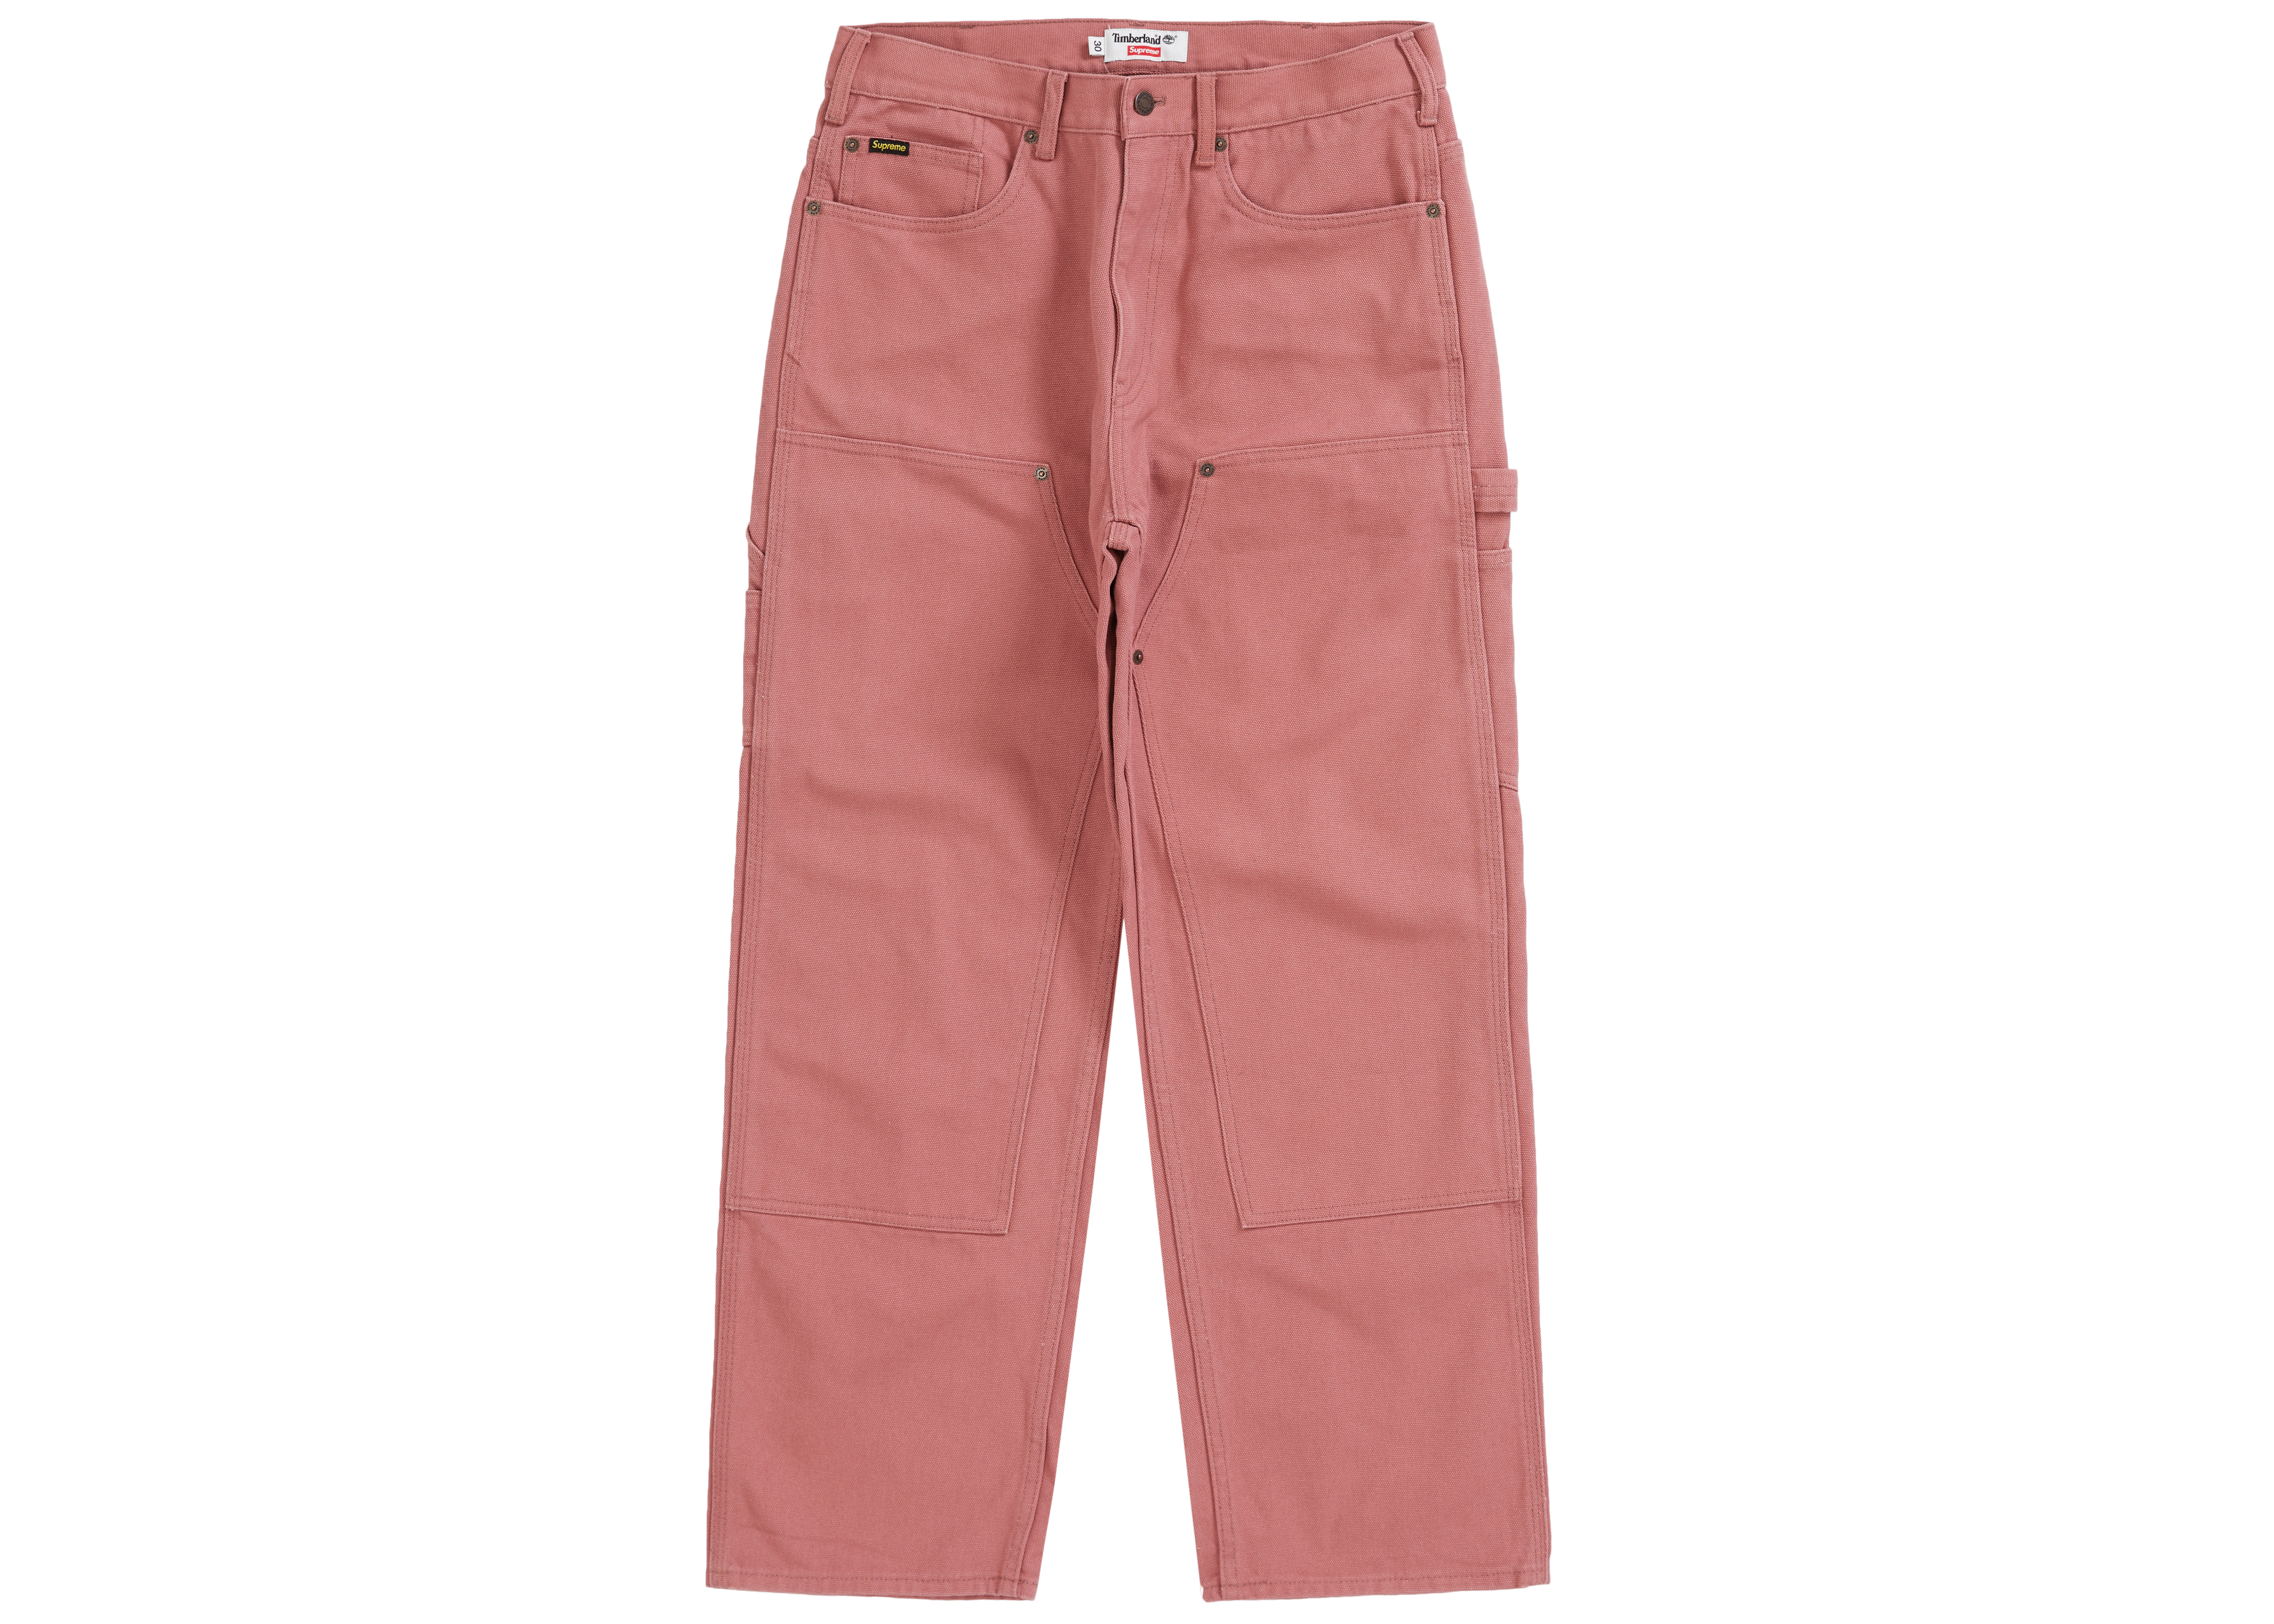 Supreme Timberland Double Knee Painter Pant Dusty Red